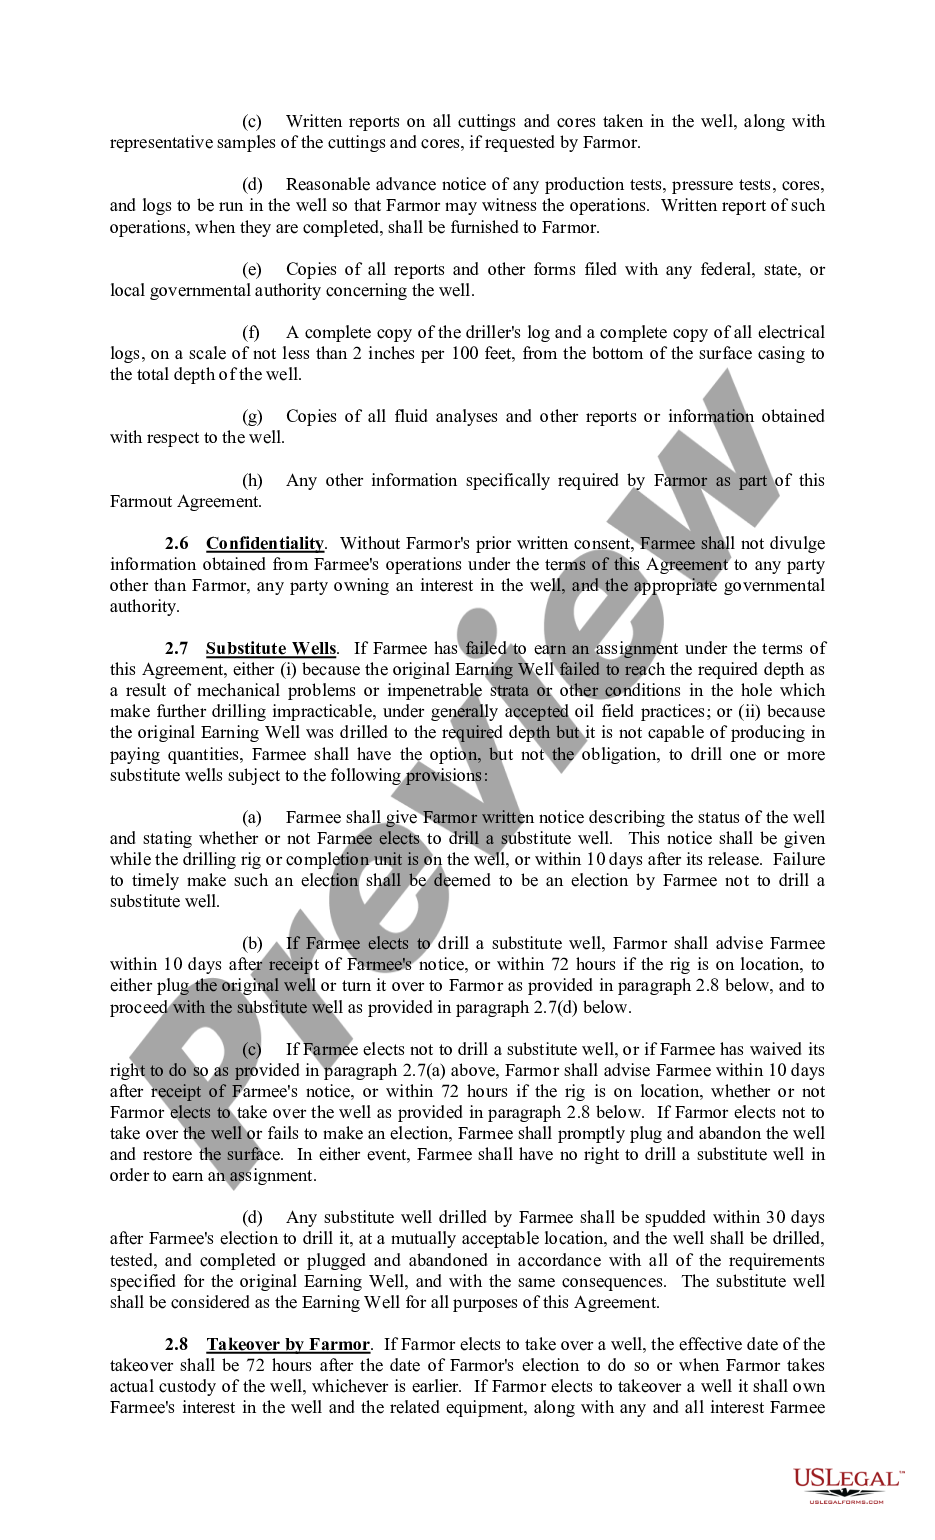 page 8 Farmout Agreement Providing For Multiple Wells with Dry Hole Earning An Assignment preview